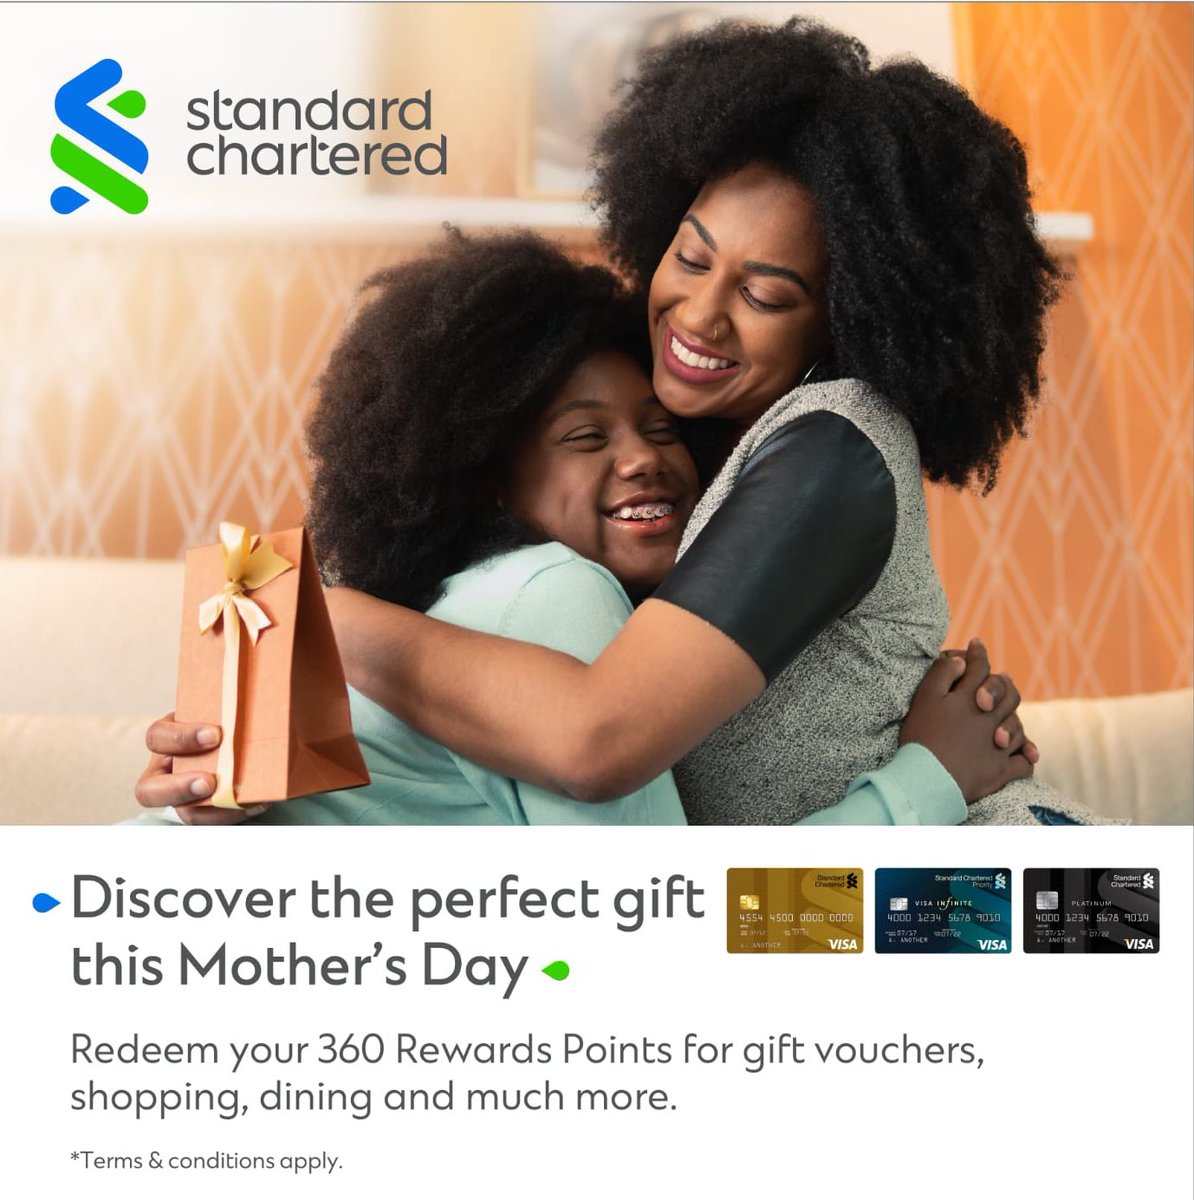 With Mother's Day coming up, discover new ways to say 'I love you Mum' through your StanChart Visa debit/credit card. You have been accumulating reward points every time you paid using your card. Redeem your points for a special Mother’s Day treat here: rewards.sc.com/ke/